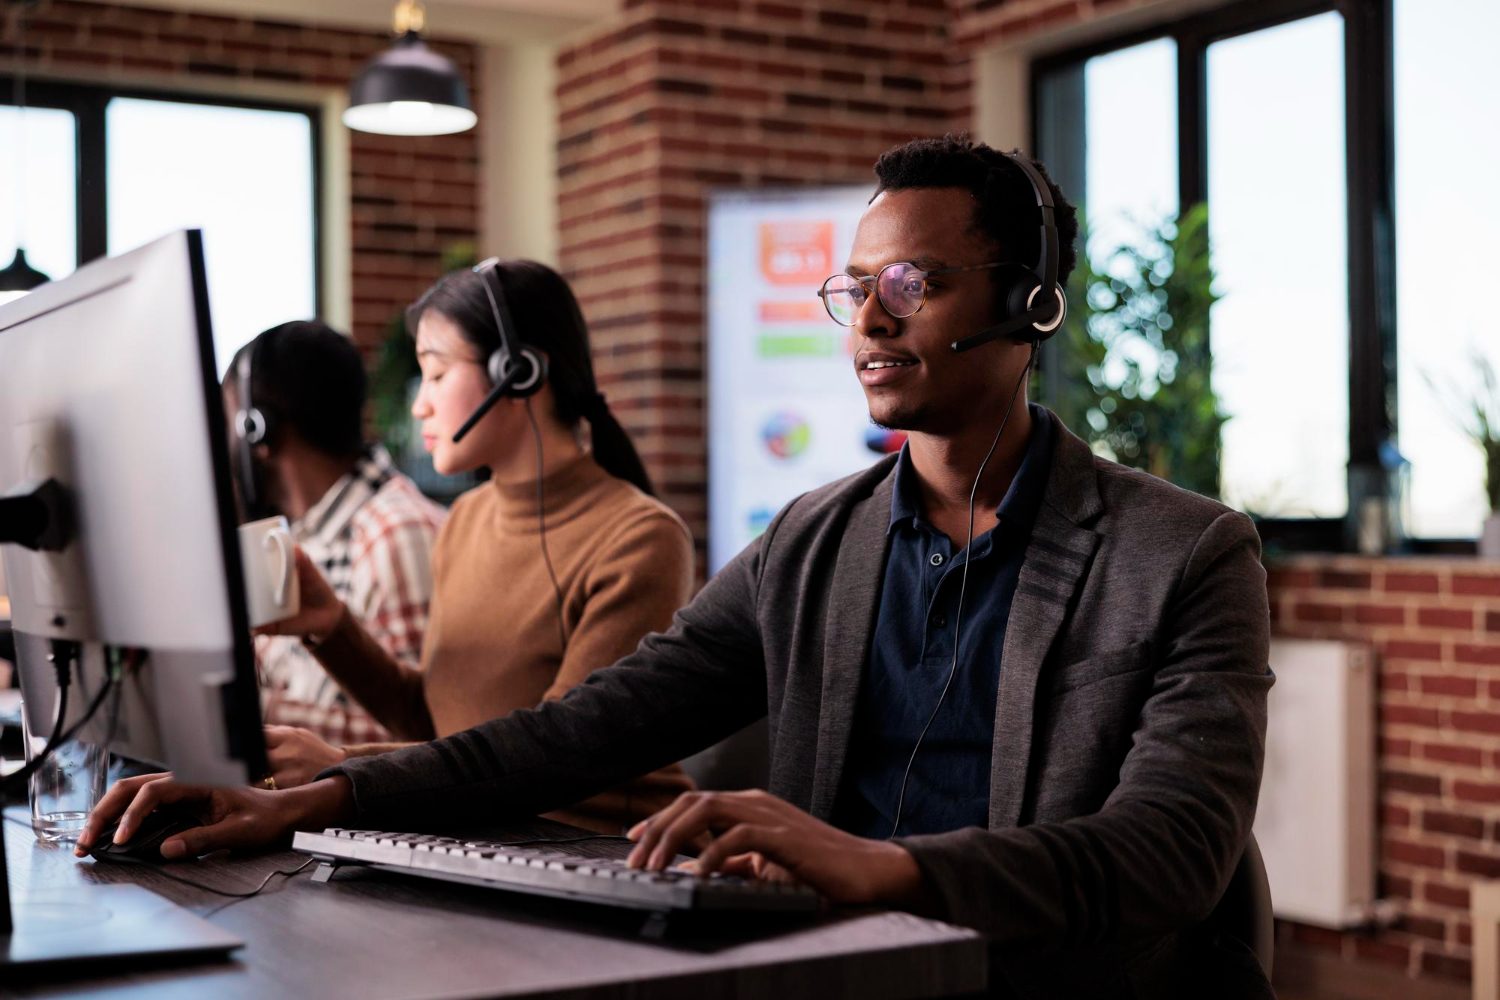 A renowned customer service outsourcing call center in Madagascar provides stellar customer support to an emerging e-Commerce brand looking to successfully-penetrate EMEA-based markets; the customer service agents provide tailored multilingual support to successfully-support the brand's growing customer base.